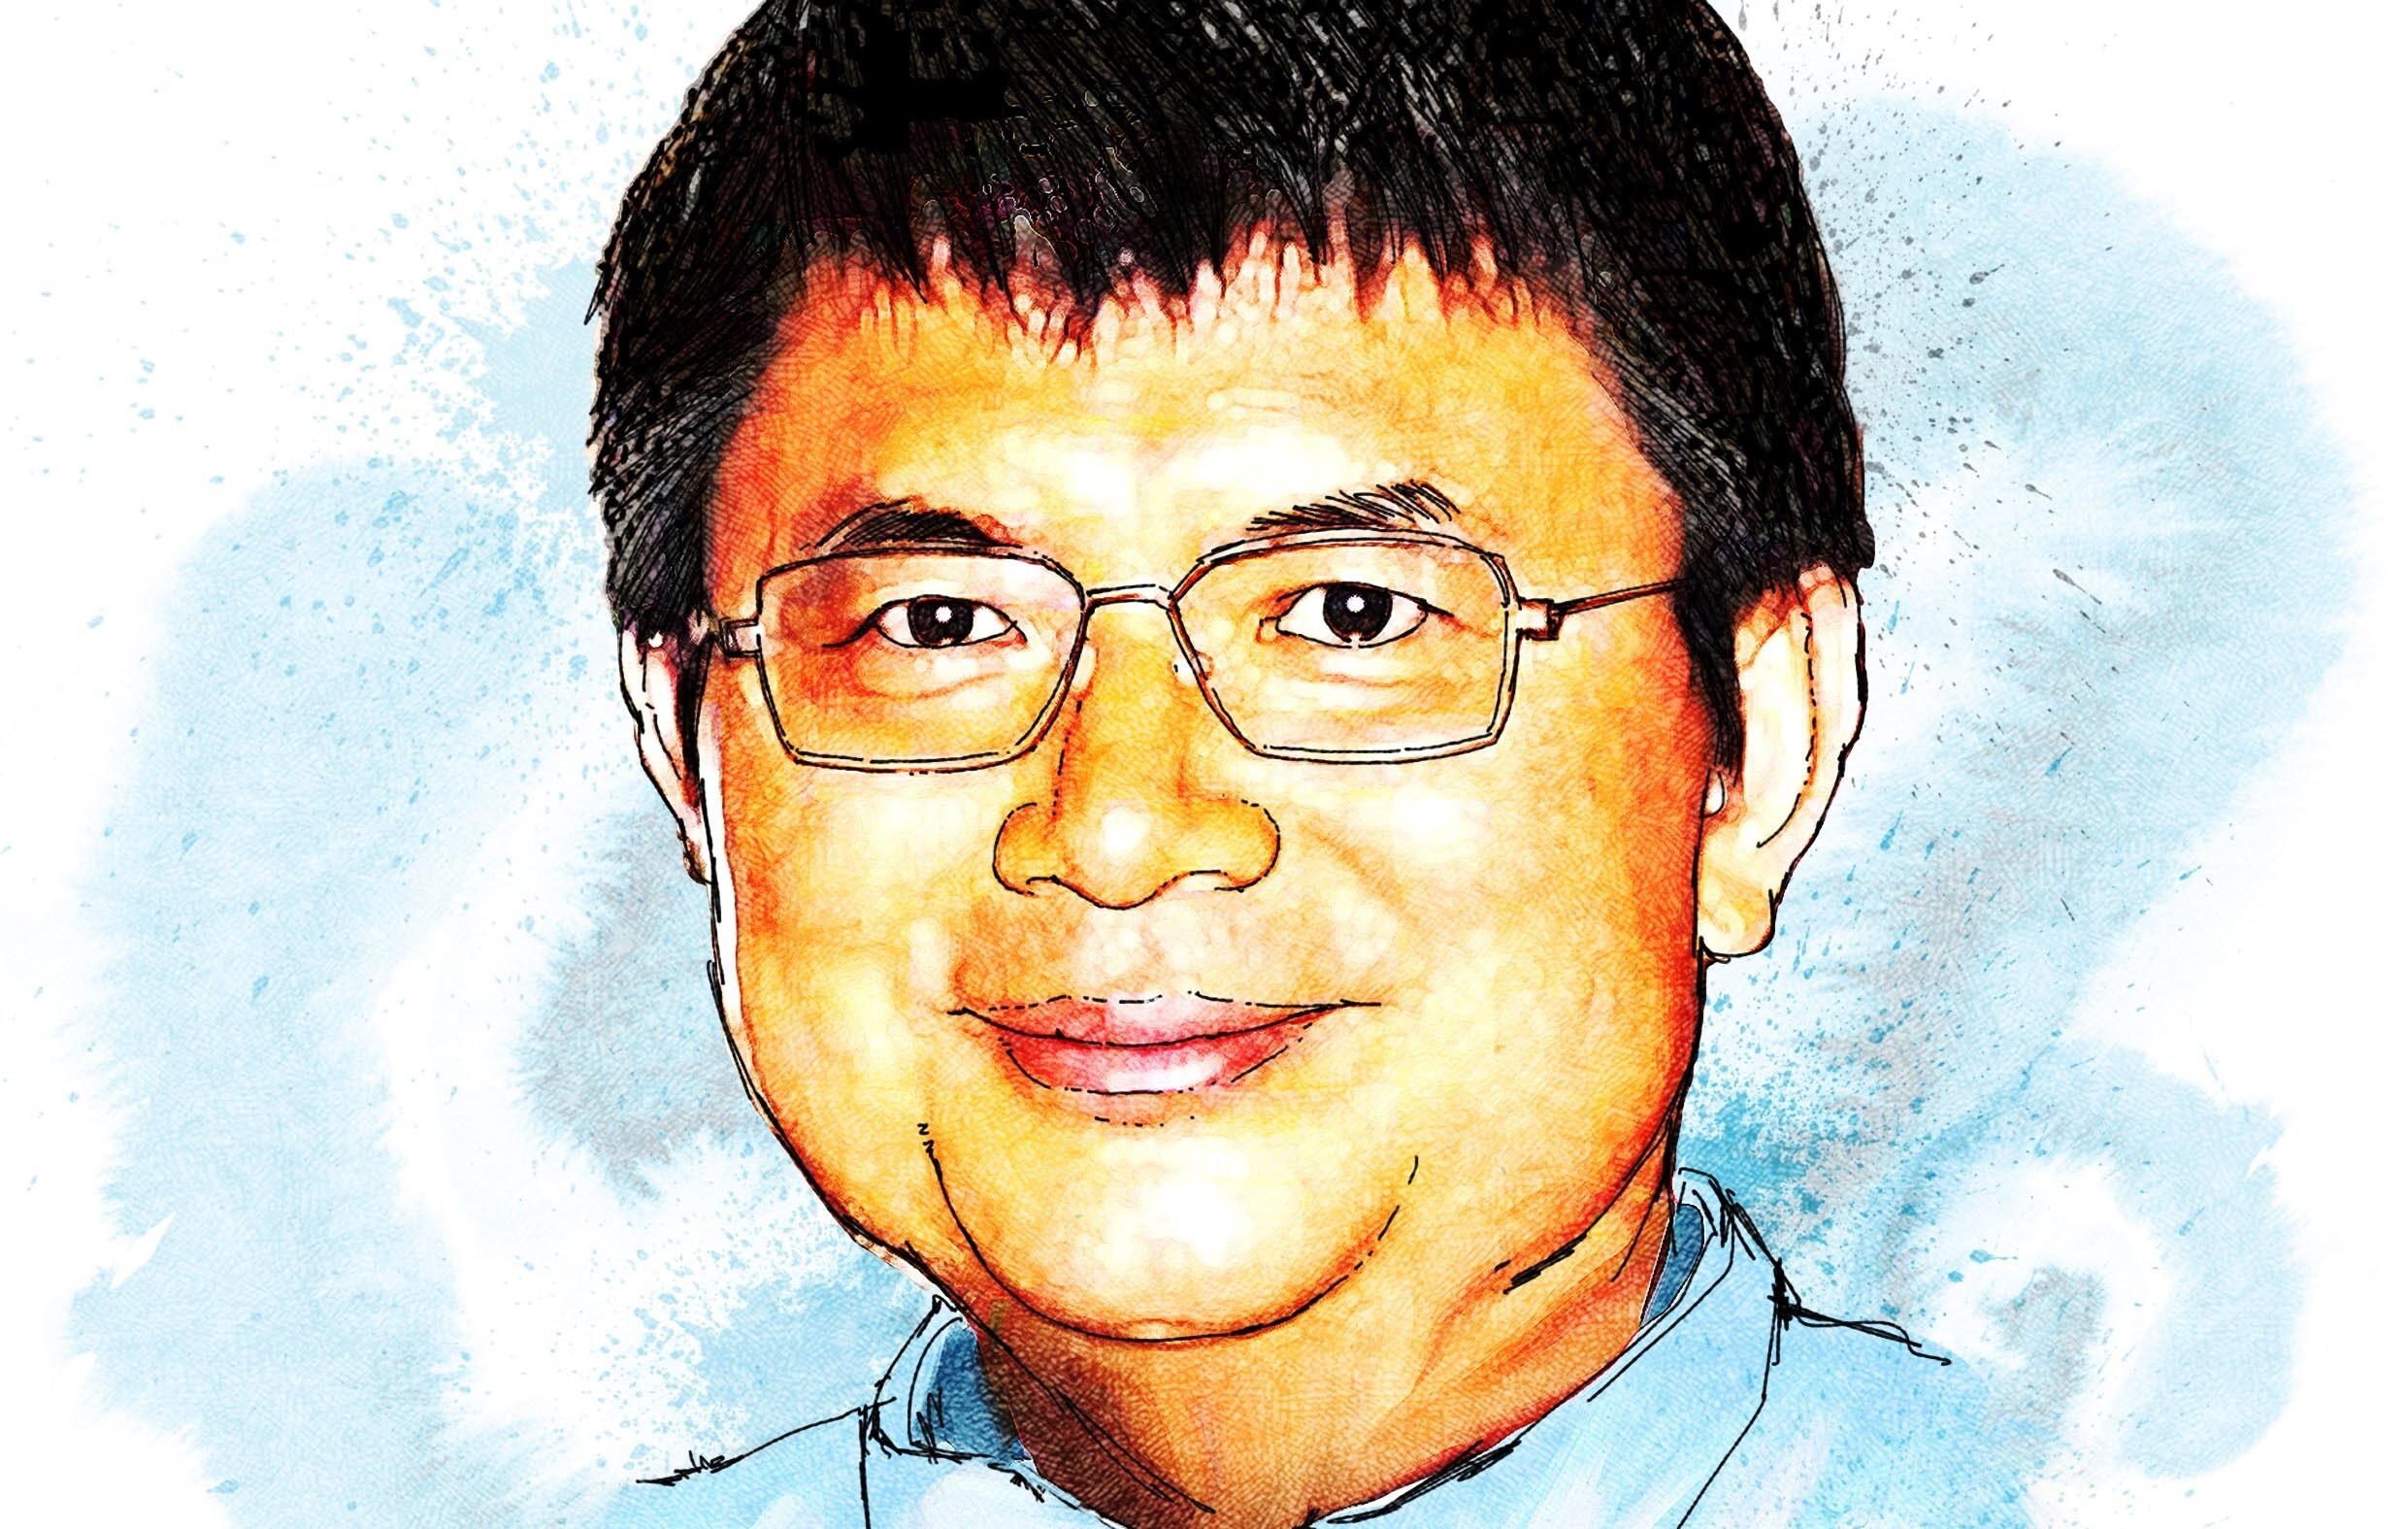 Xiao Jianhua, founder of the Tomorrow Group of companies, is awaiting trial in an unknown location on charges of bribery and stock price manipulation, while key parts of his sprawling empire are been taken over, or sold. Illustration: Henry Wong